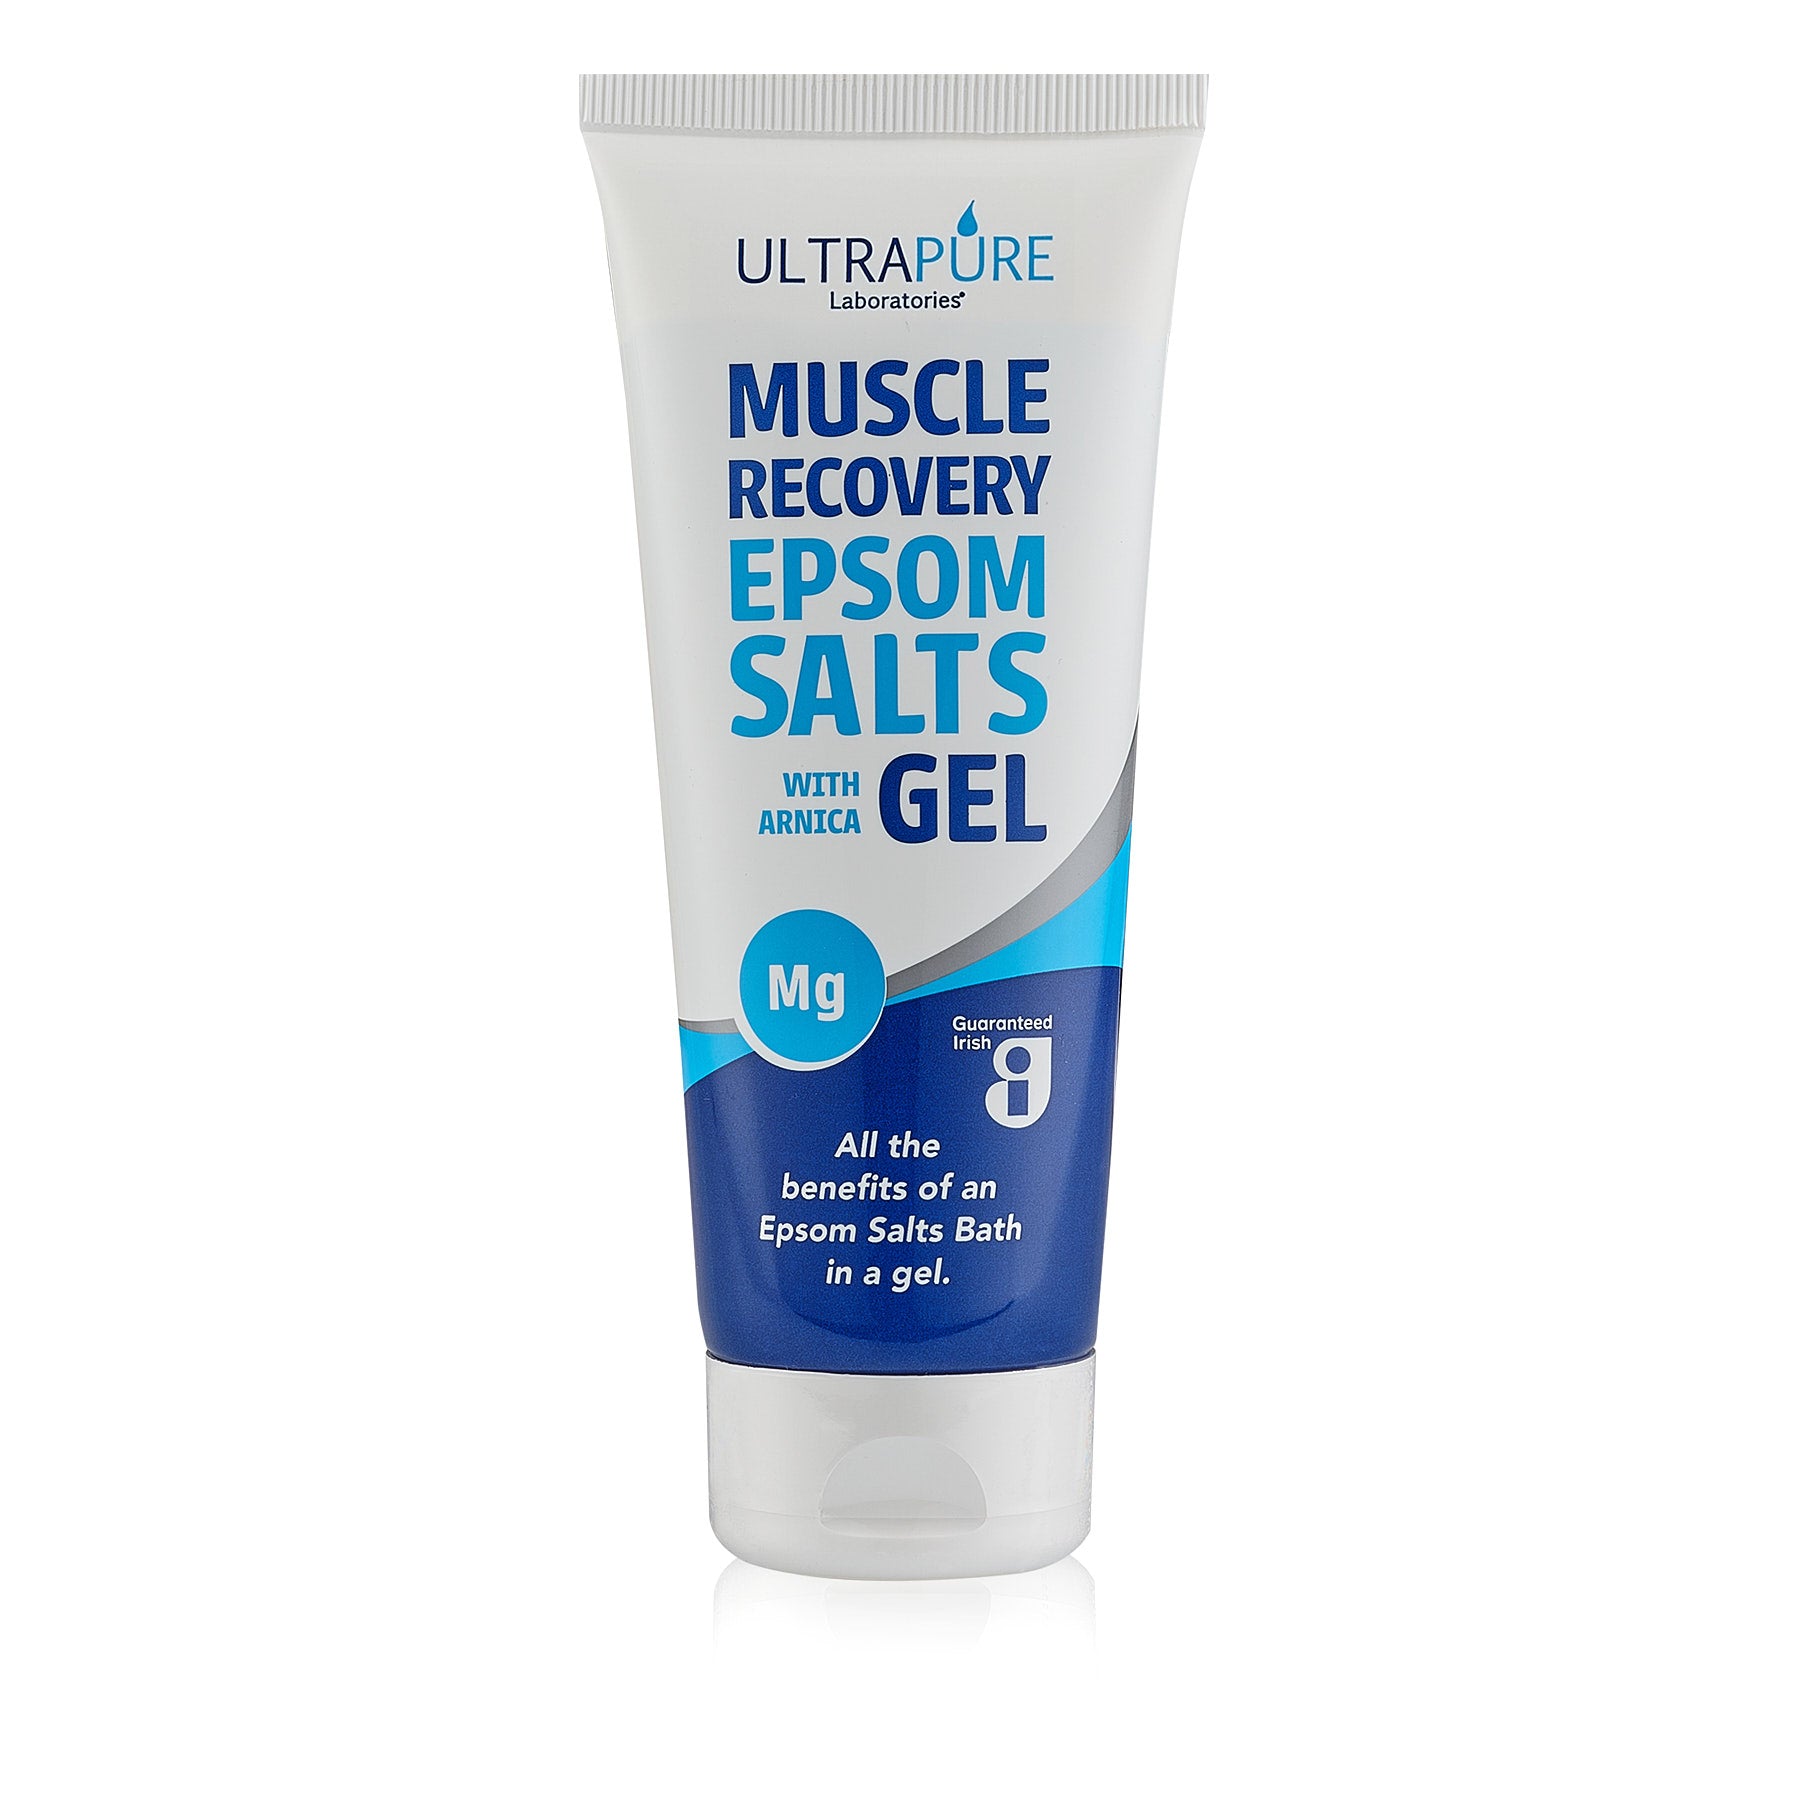 MUSCLE RECOVERY EPSOM SALTS GEL WITH ARNICA ULTRAPURE - 200ML